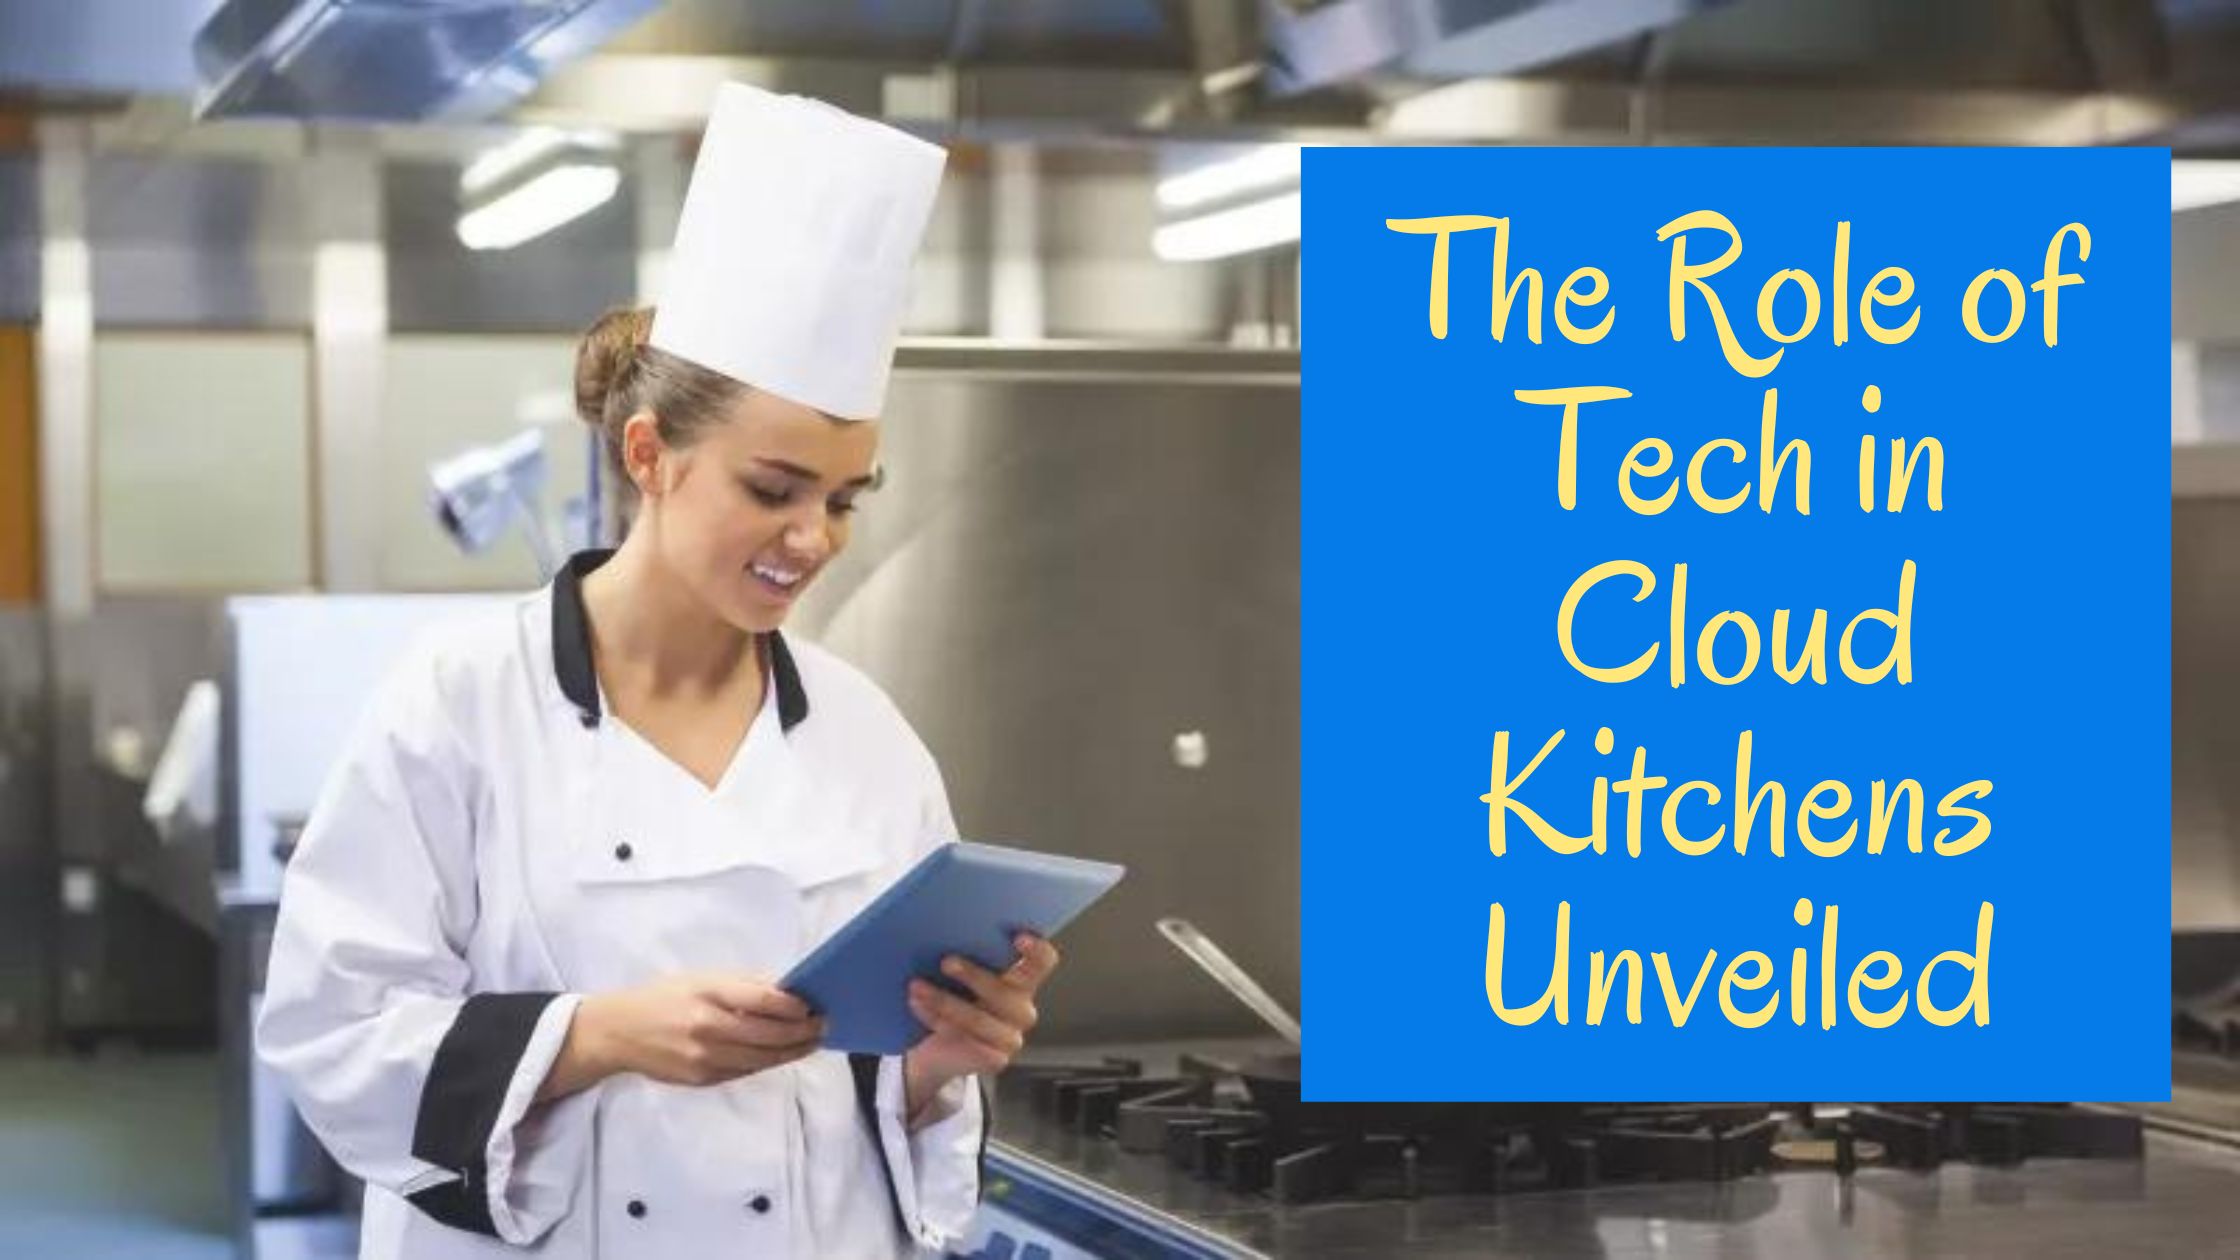 The Role of Tech in Cloud Kitchens Unveiled